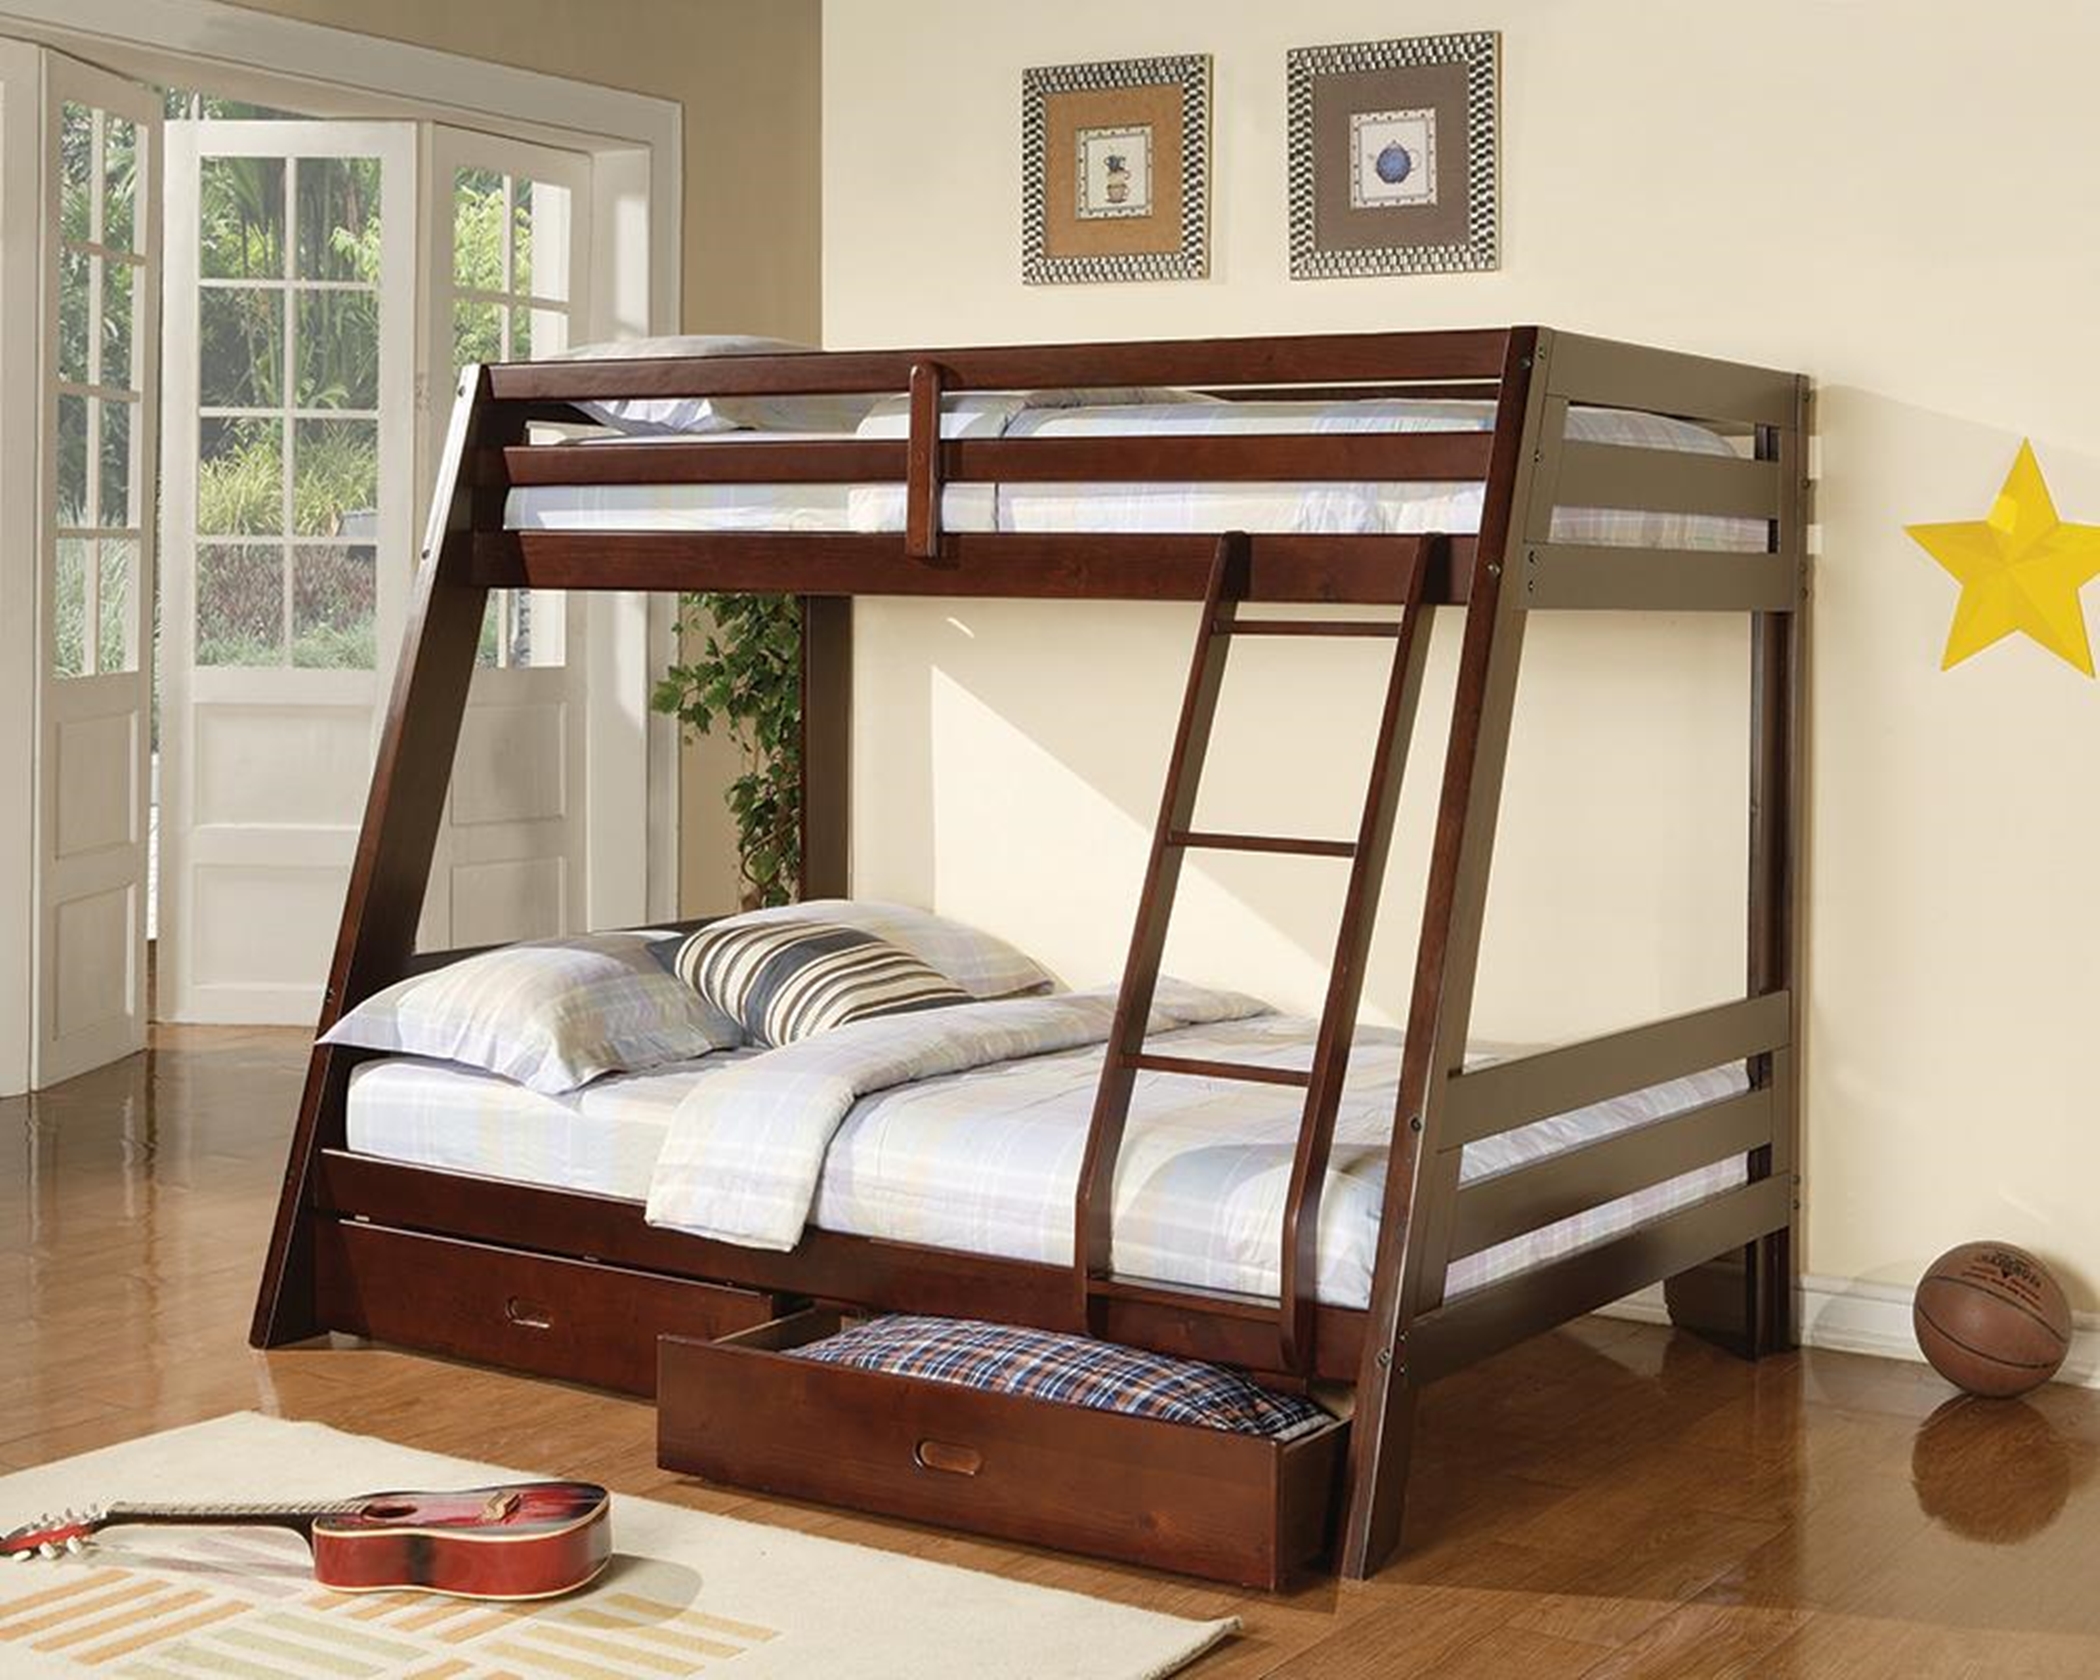 Hawkins Capp. Twin over Full Bunk Bed - Click Image to Close